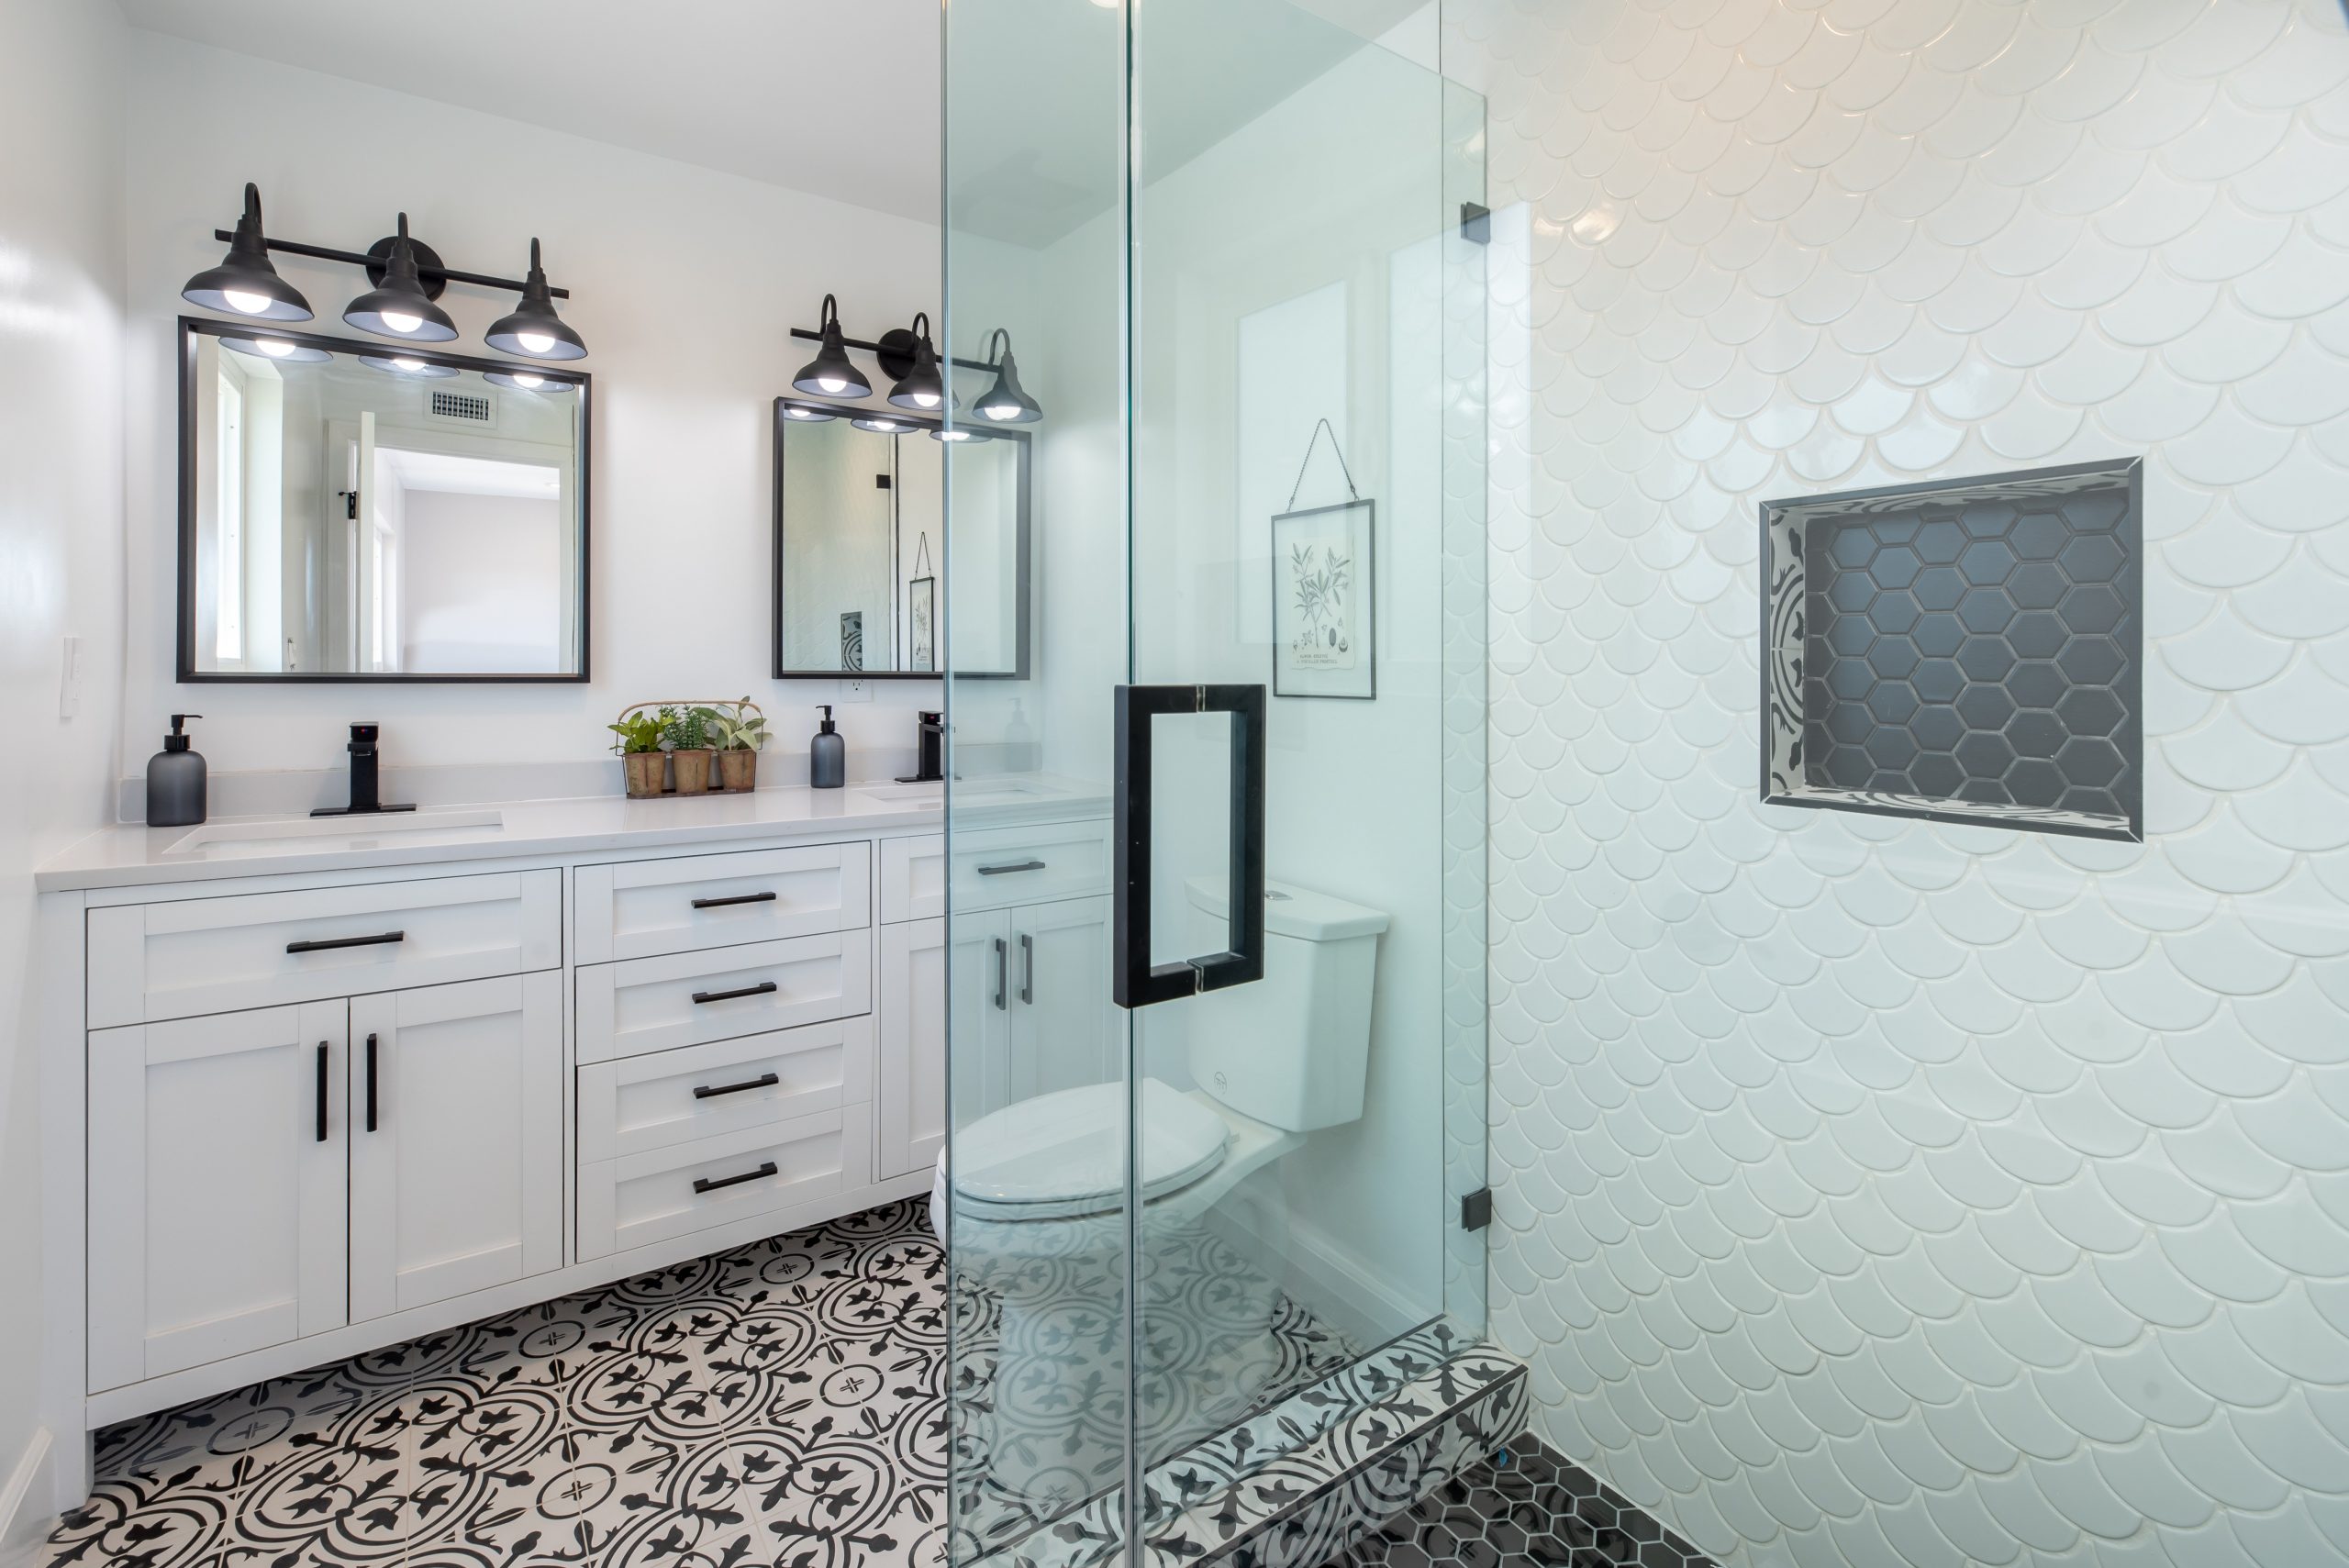 The upcoming trends for bathroom cabinets in 2021